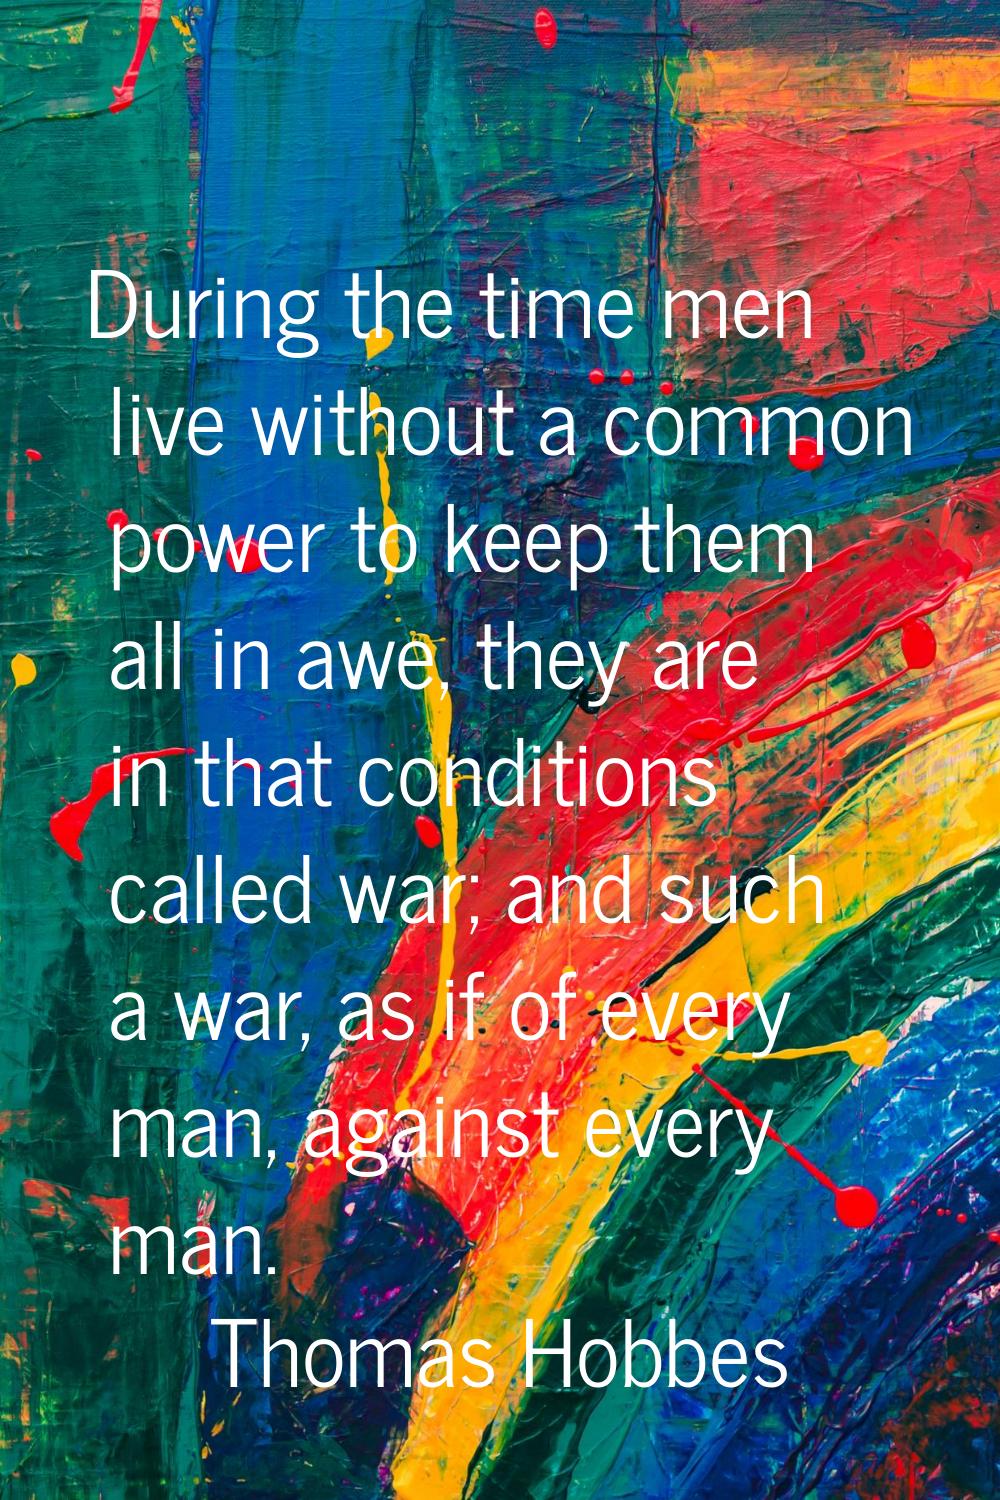 During the time men live without a common power to keep them all in awe, they are in that condition